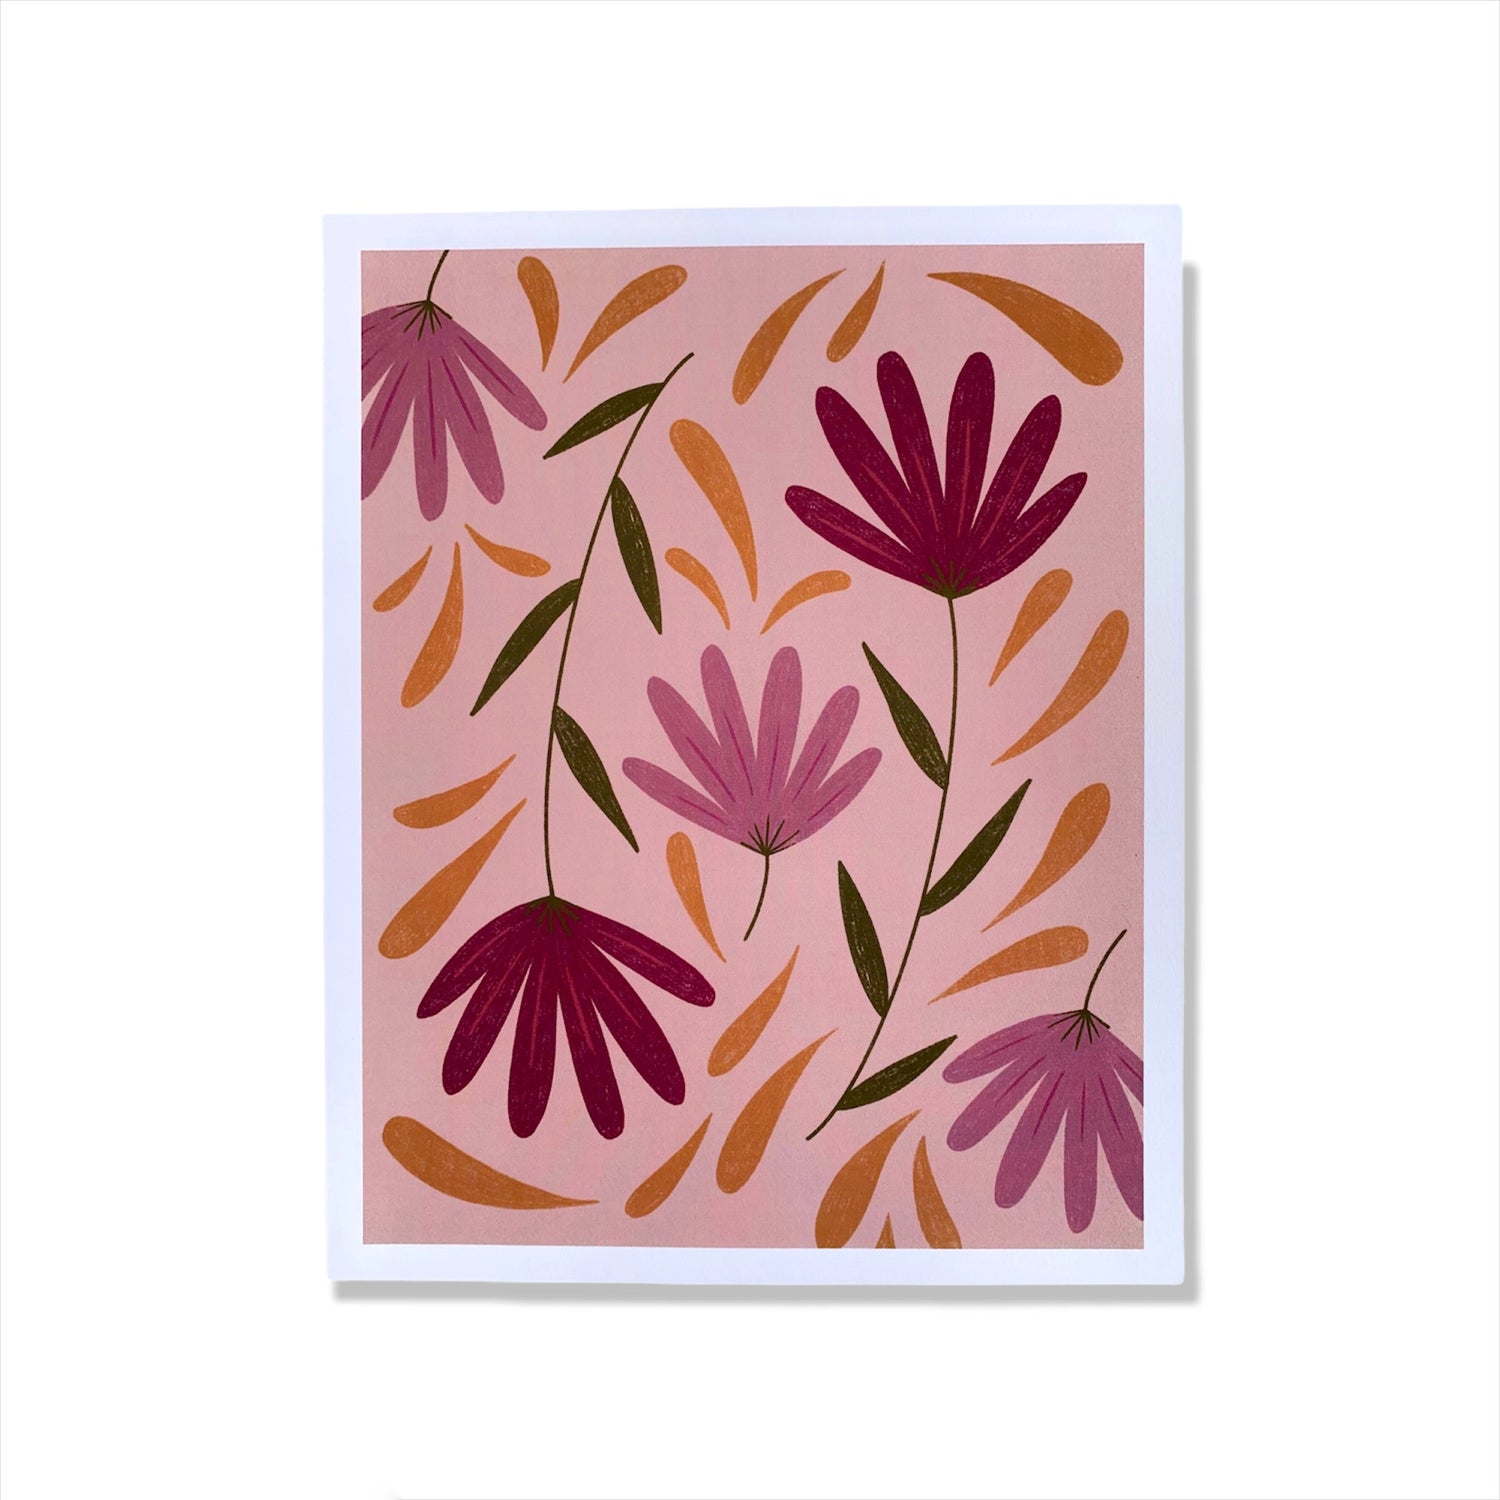 Colorful flowers on pink background against a white background